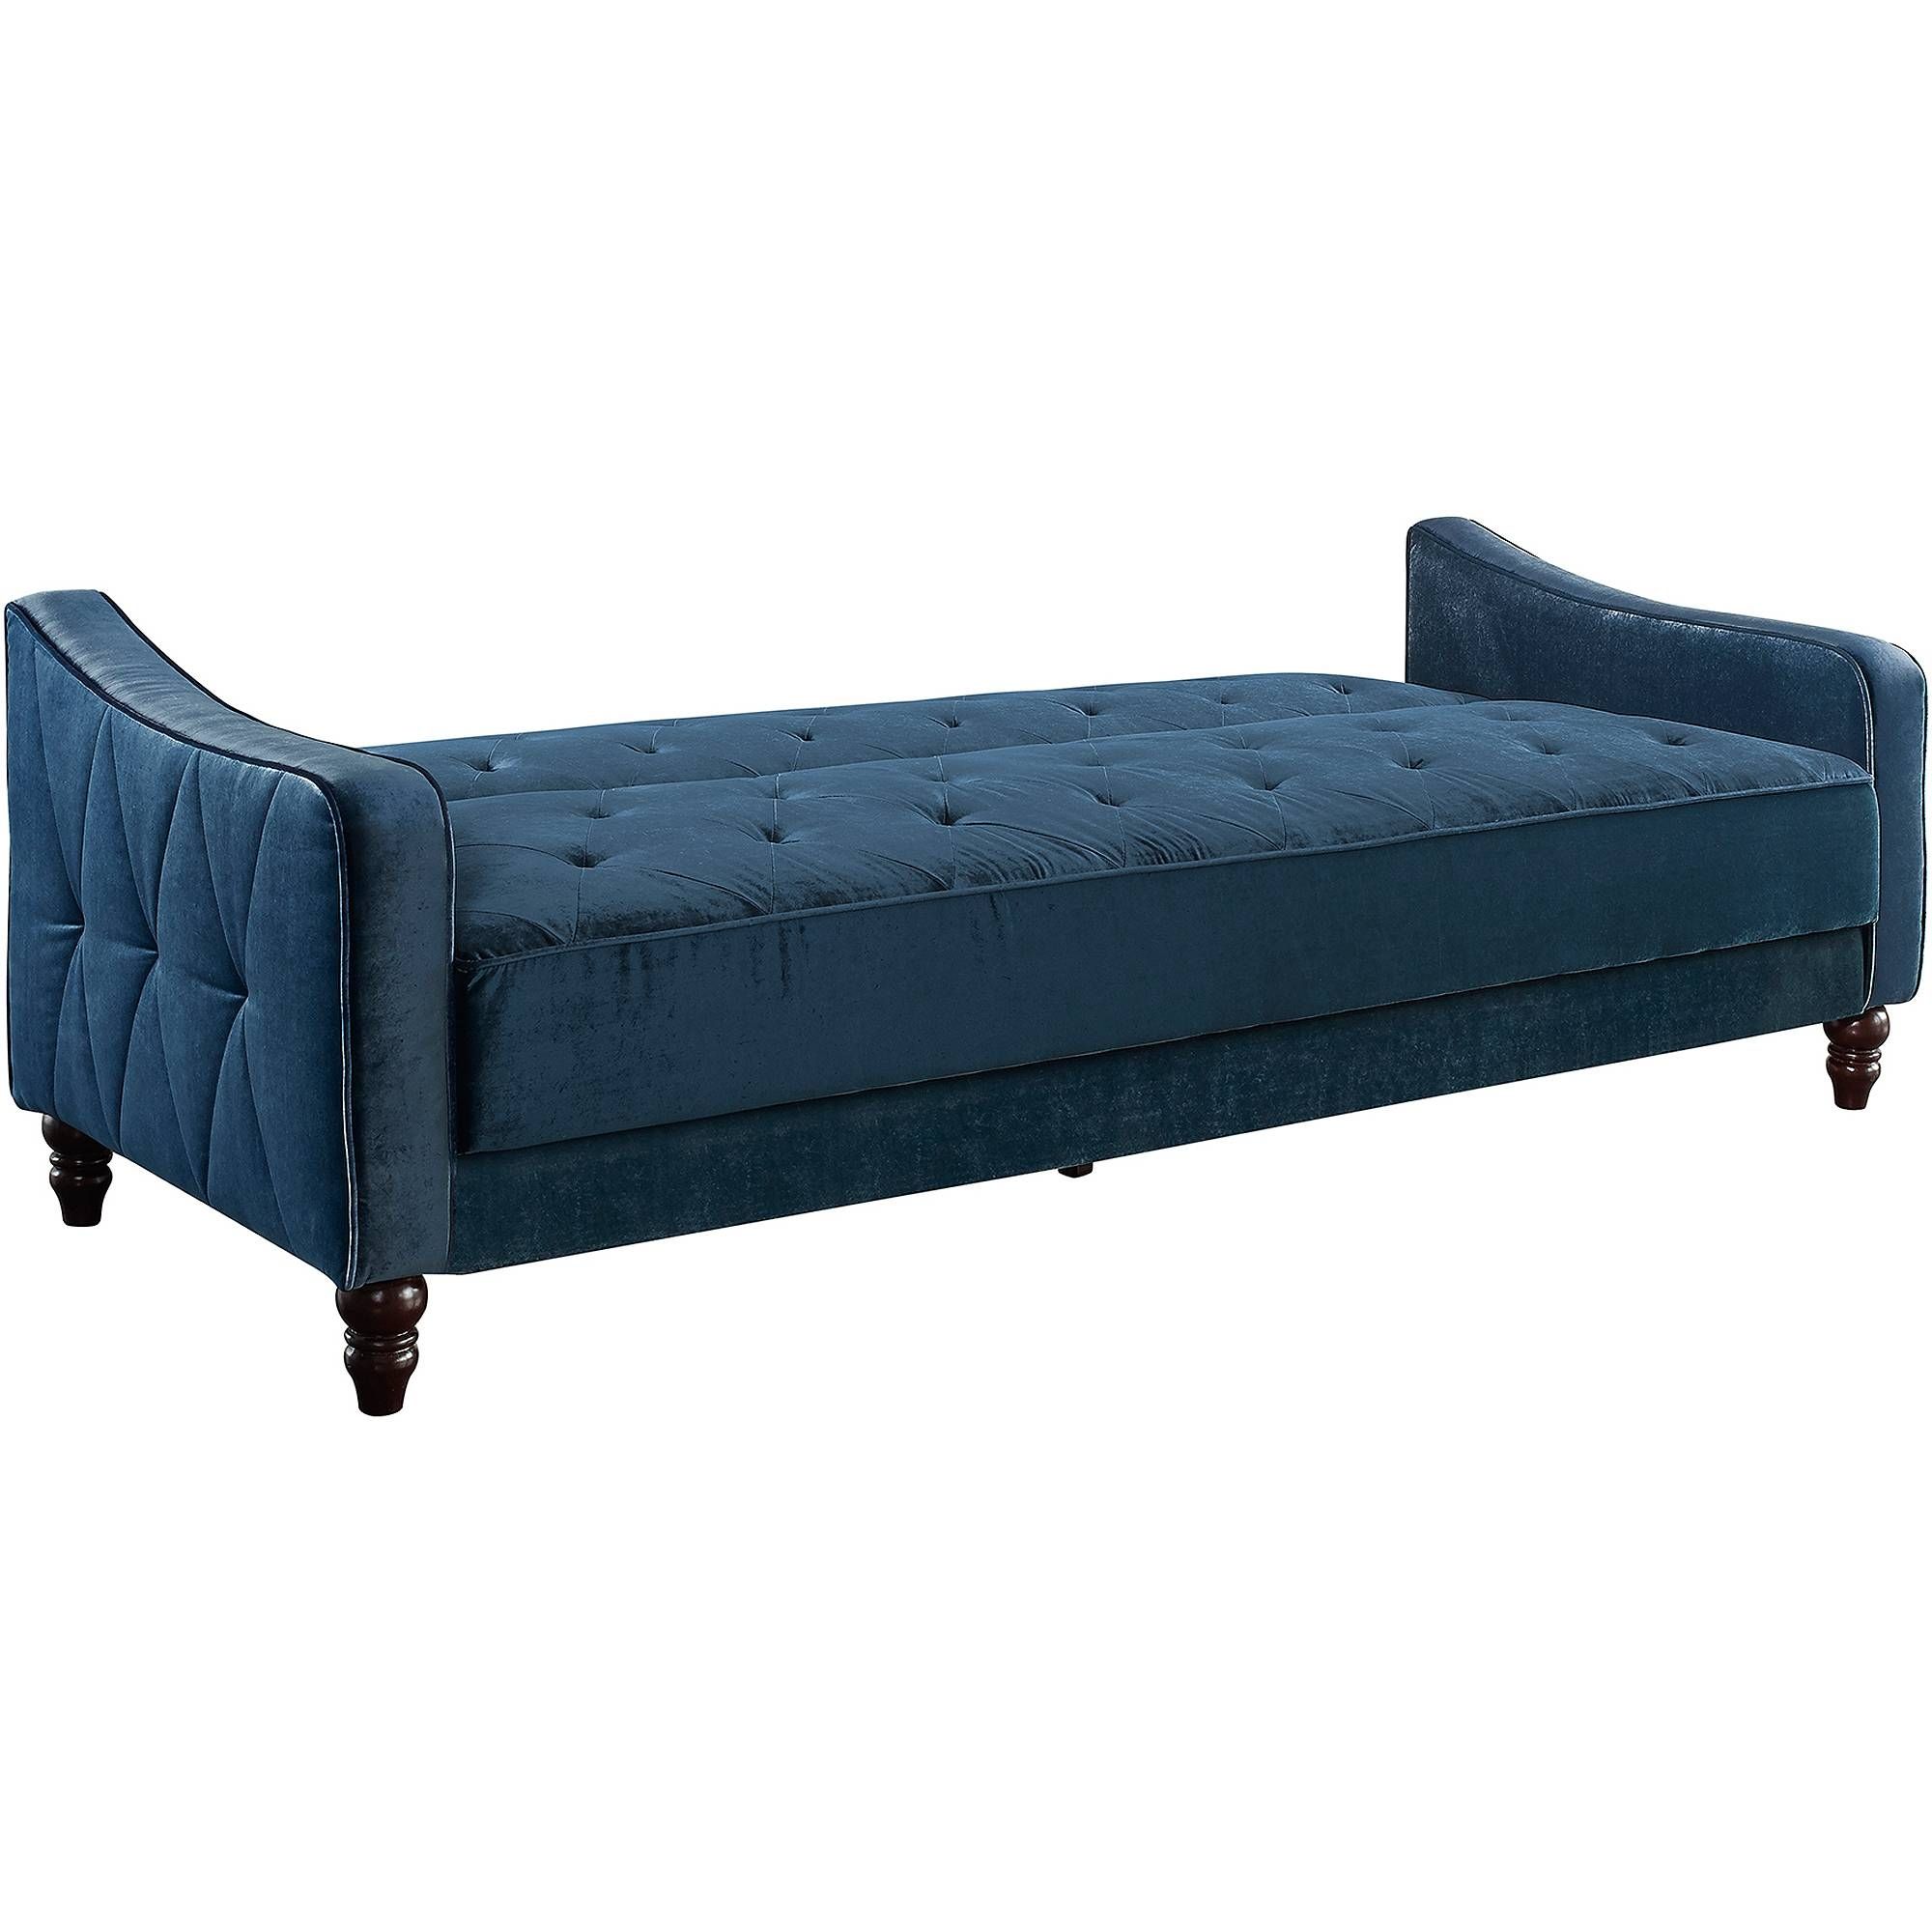 Novogratz Vintage Tufted Sofa Sleeper Ii, Multiple Colors Pertaining To Affordable Tufted Sofa (View 13 of 30)